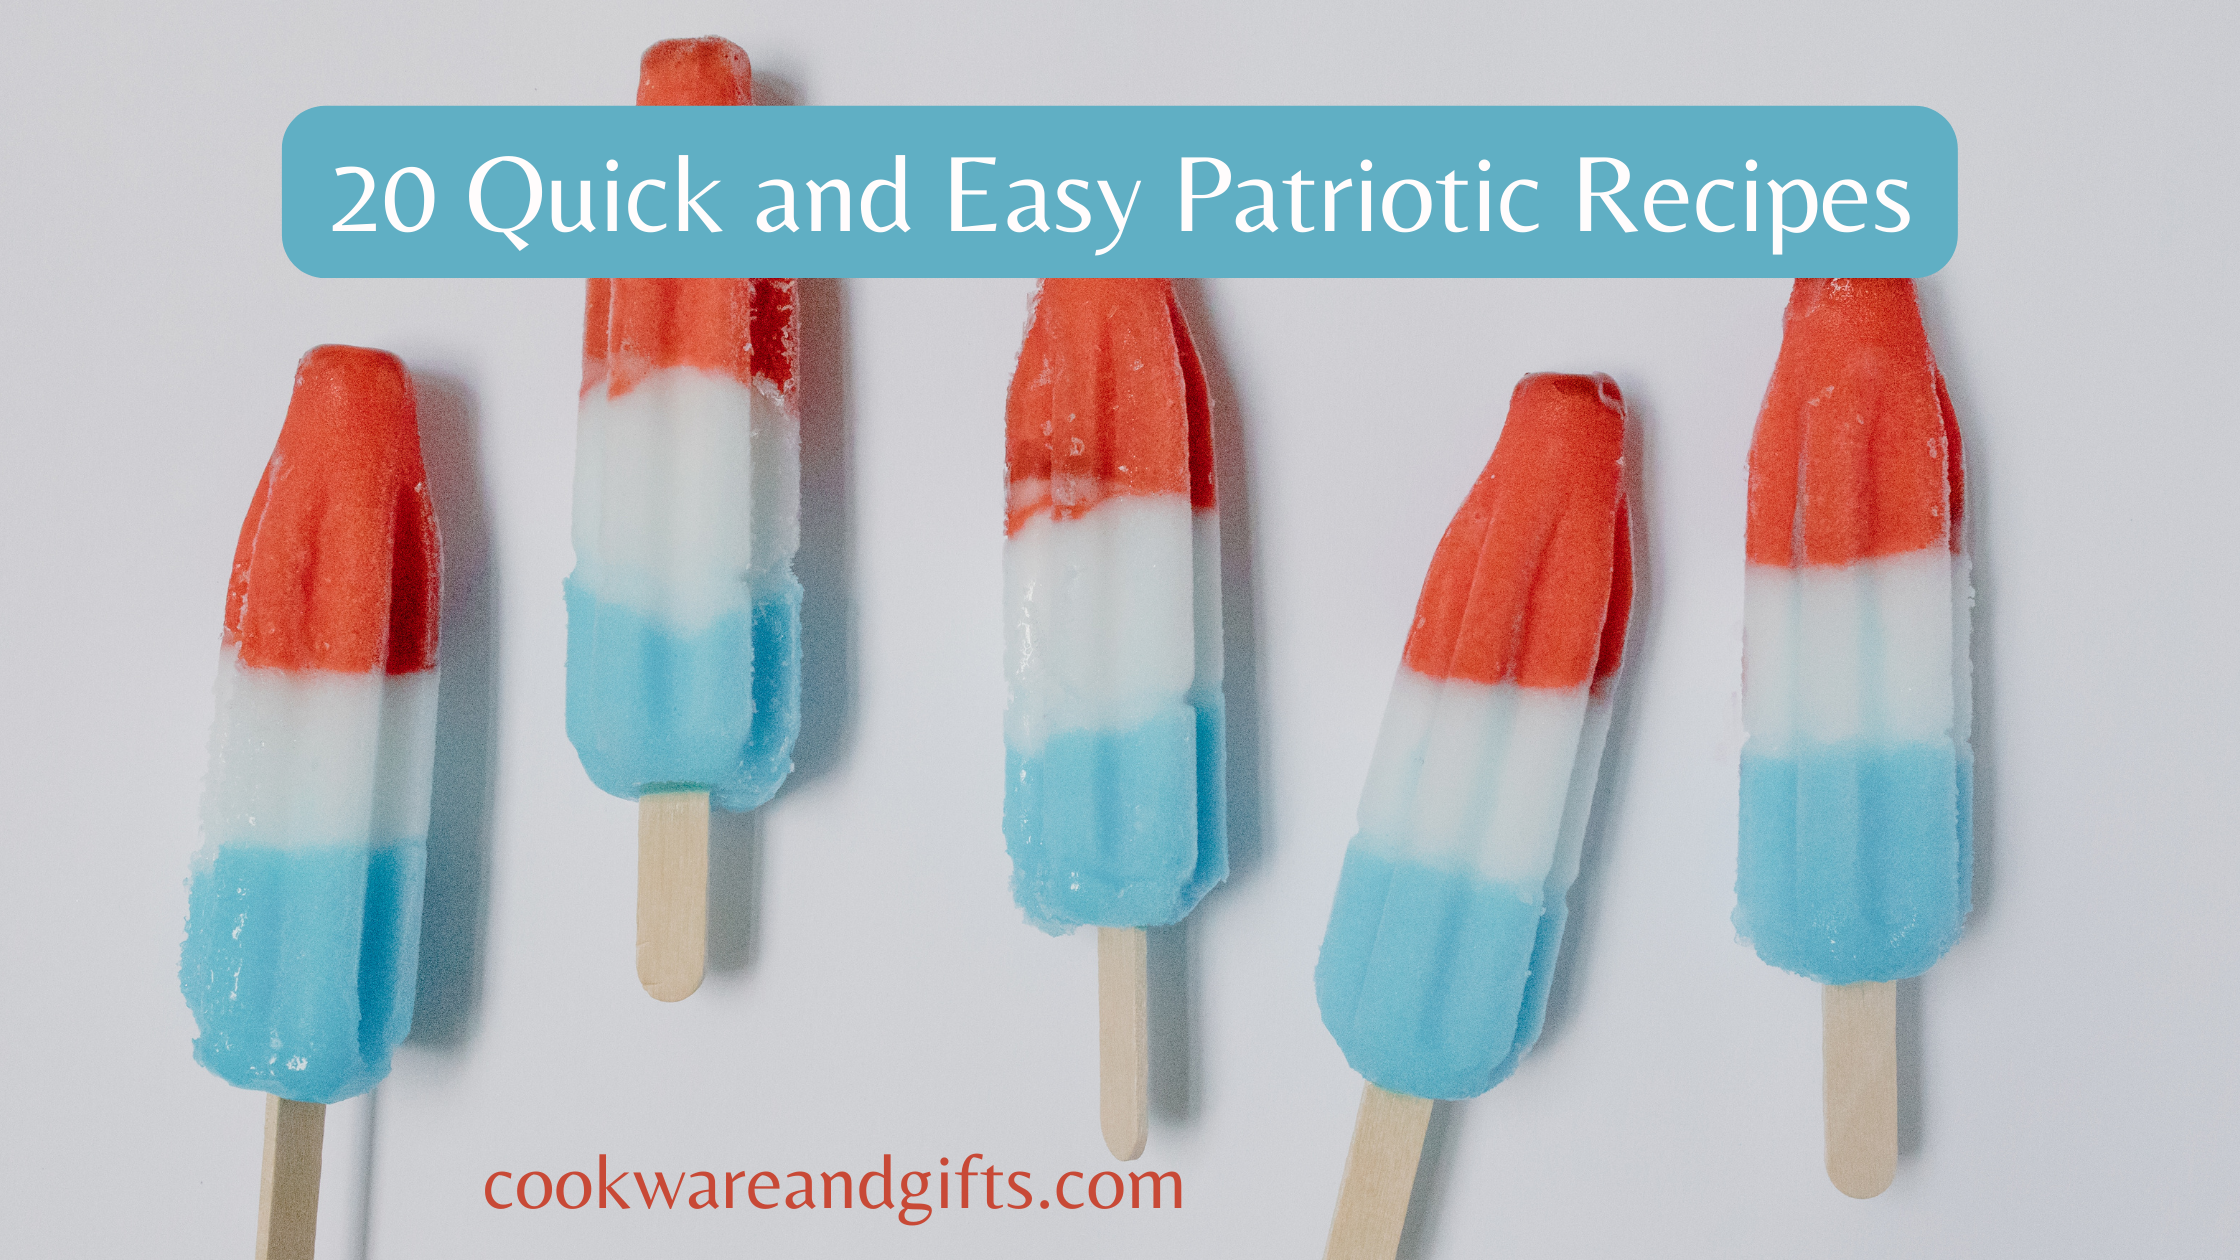 Celebrate America’s Independence Day with 20 Quick and Easy Patriotic Recipes